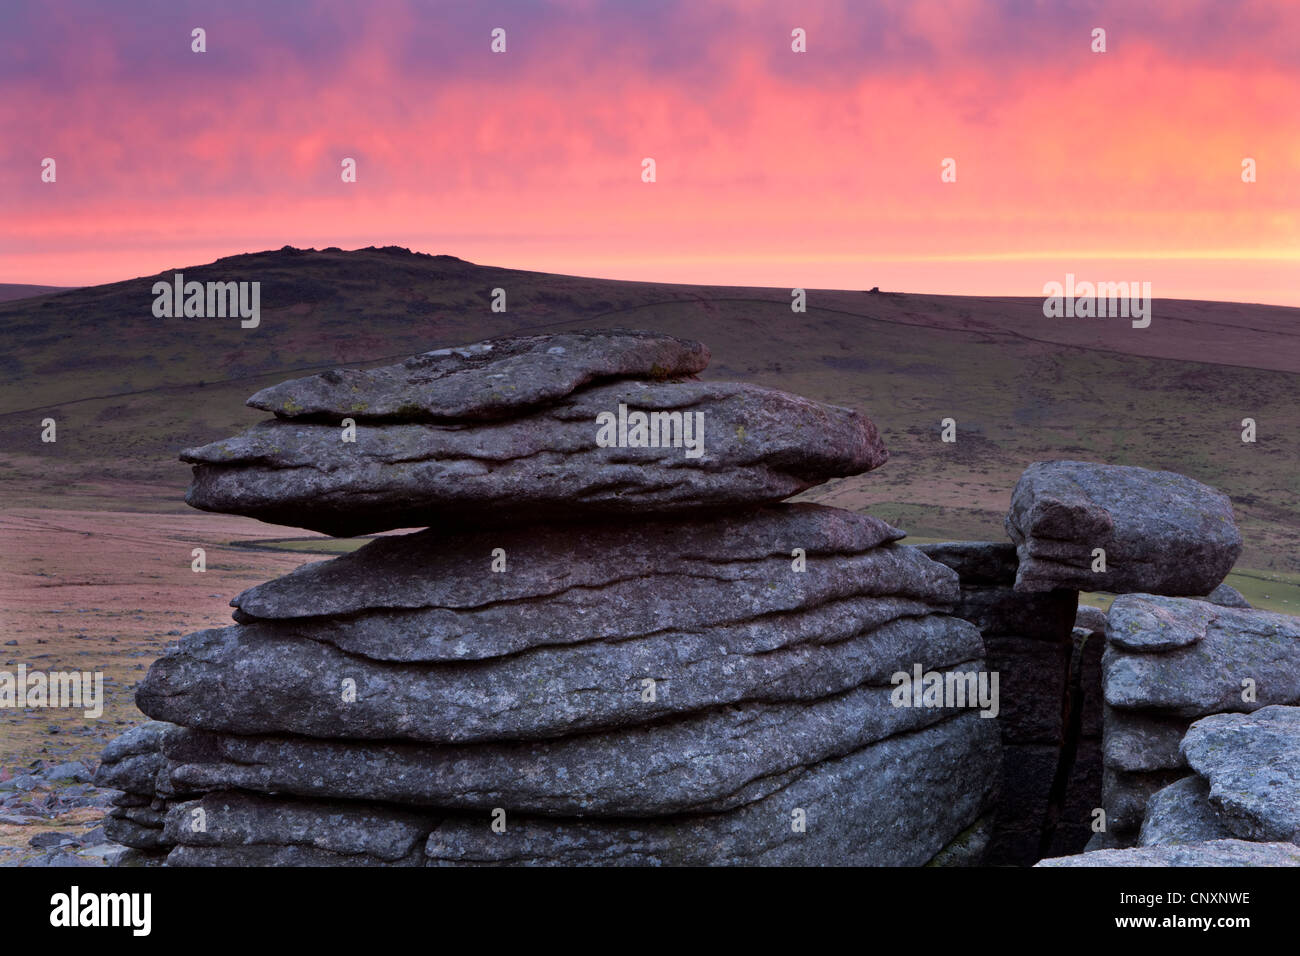 Colourful dawn sky above Great Mis Tor, viewed from the granite outcrops of Great Staple Tor, Dartmoor, Devon, England. Stock Photo